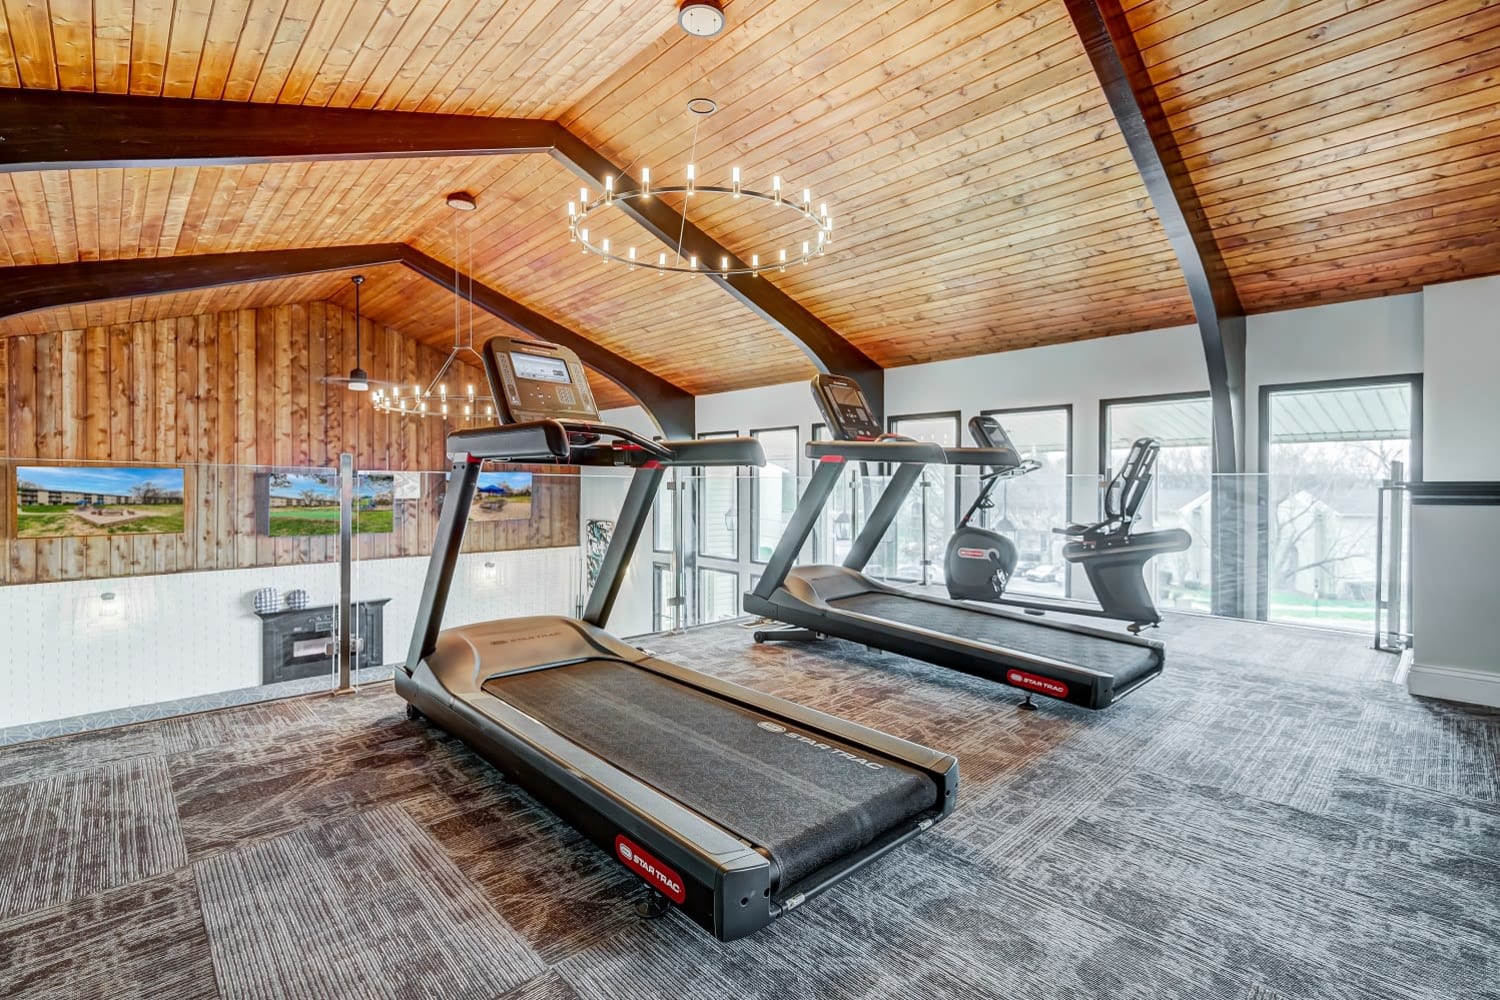 Well-equipped fitness center with cardio equipment at Lincoya Bay Apartments & Townhomes in Nashville, Tennessee